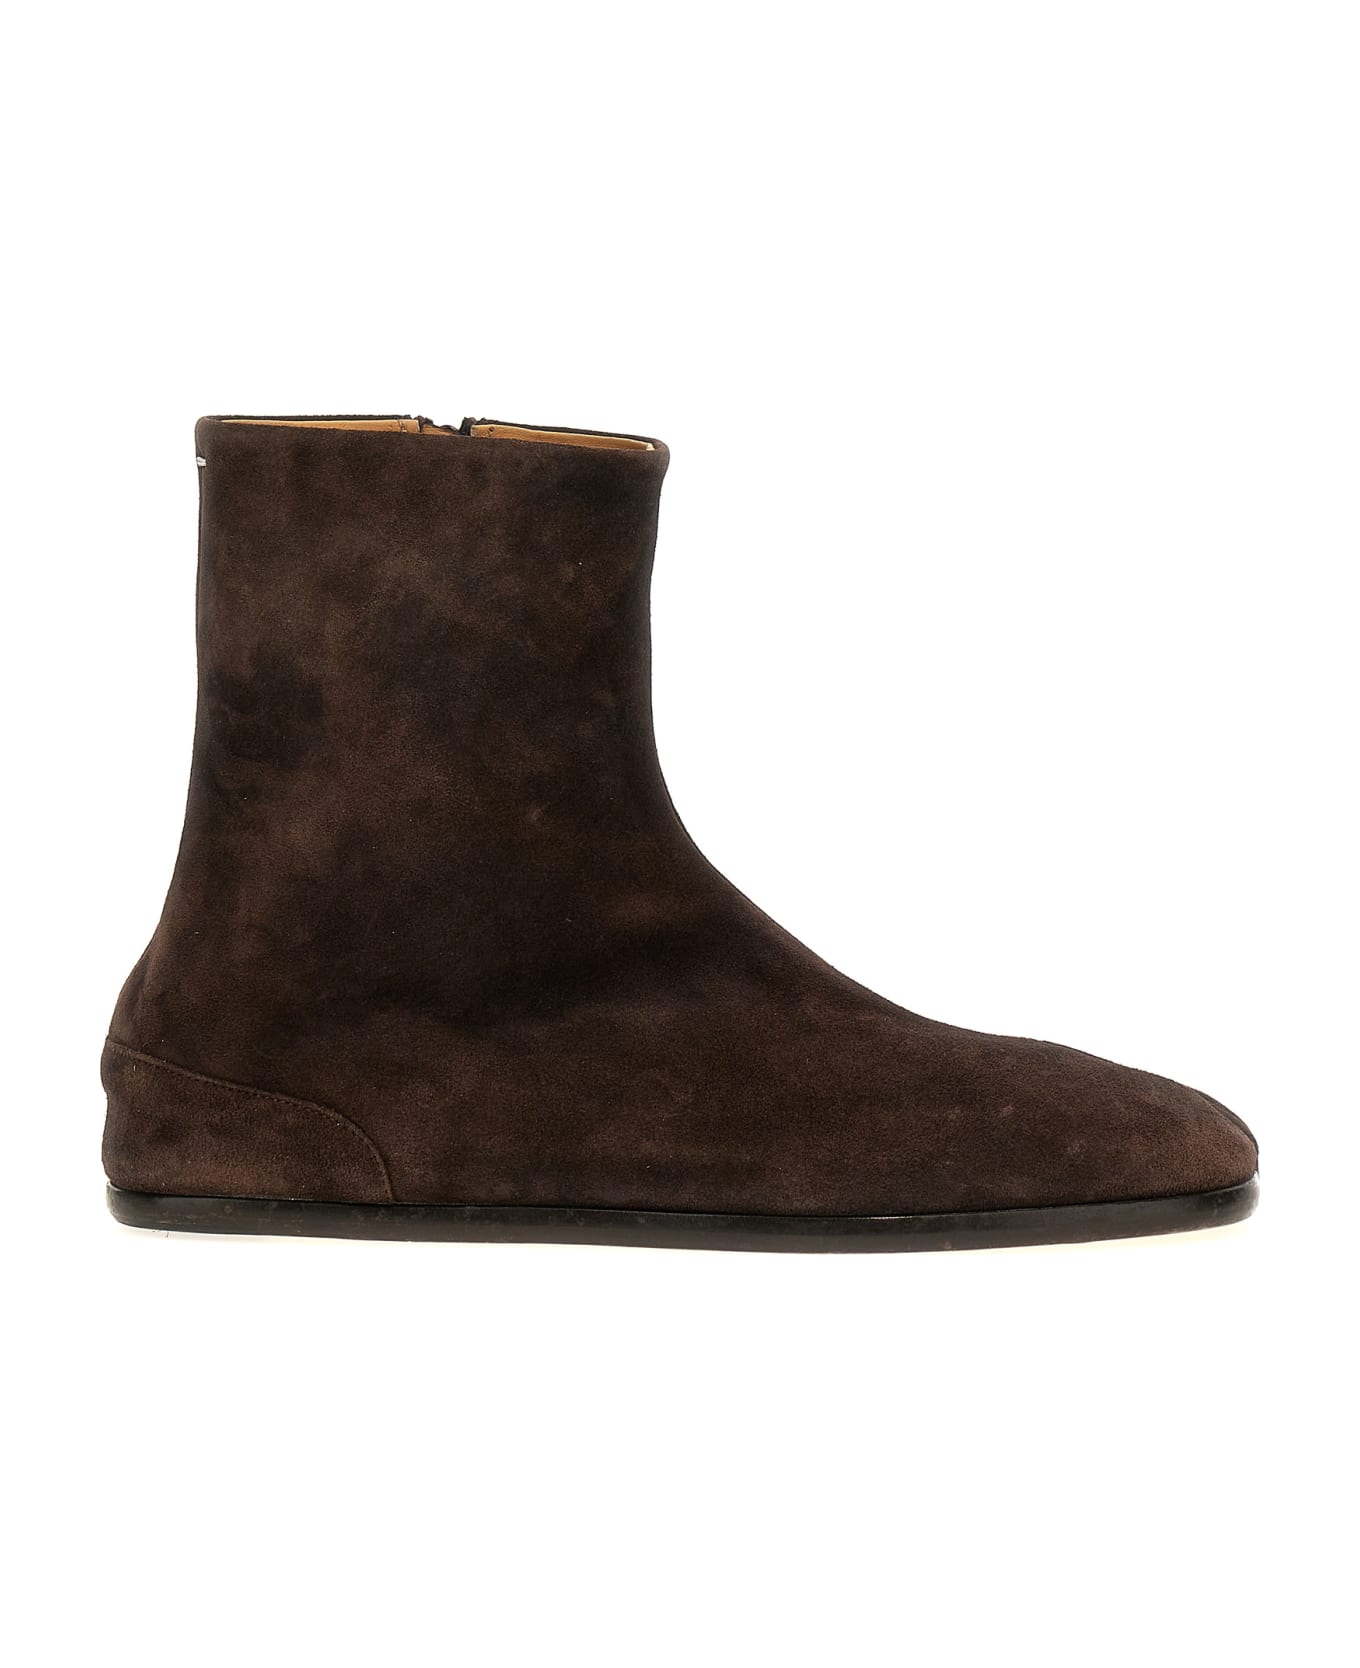 Maison Margiela Tabi Ankle Boots - Brown ブーツ